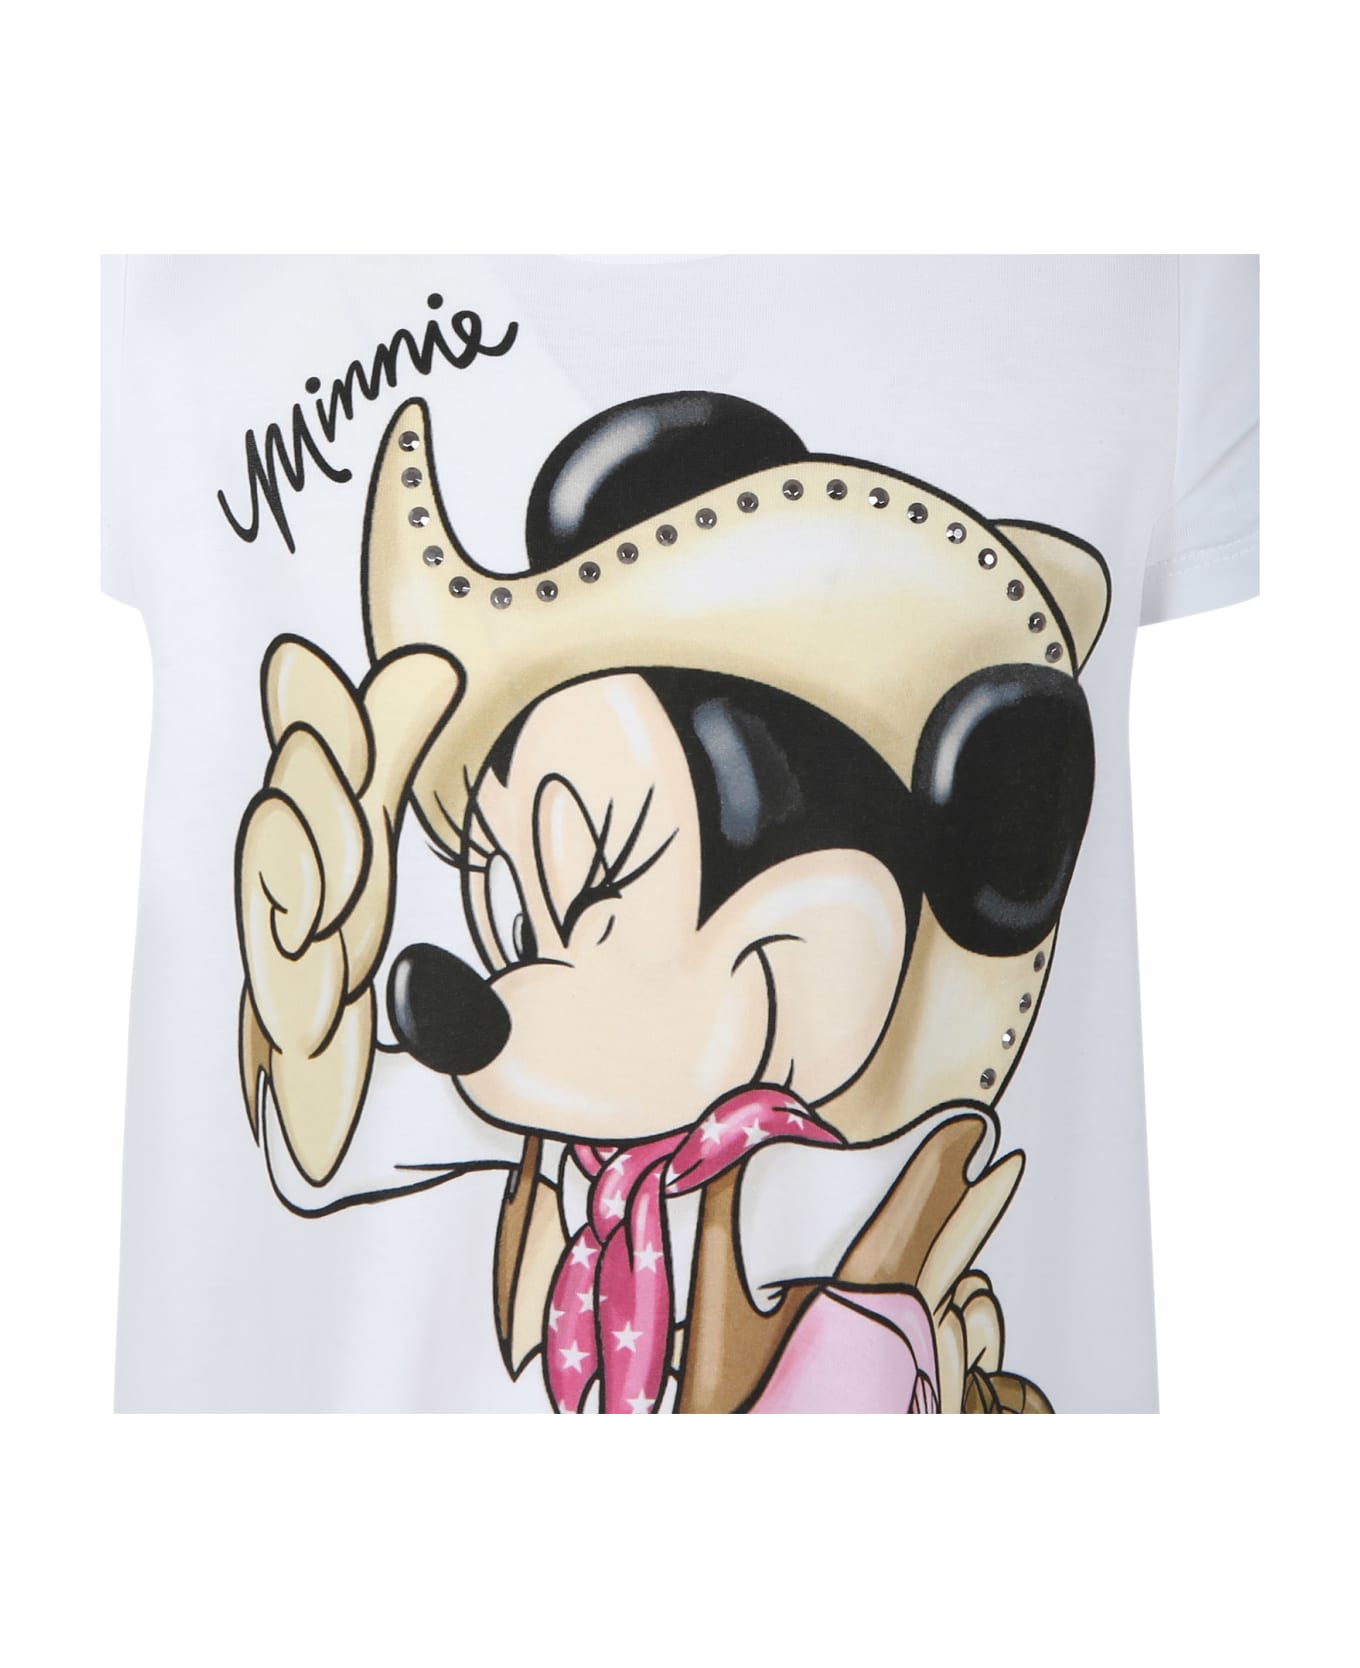 Monnalisa White T-shirt For Girl With Minnie - White Tシャツ＆ポロシャツ